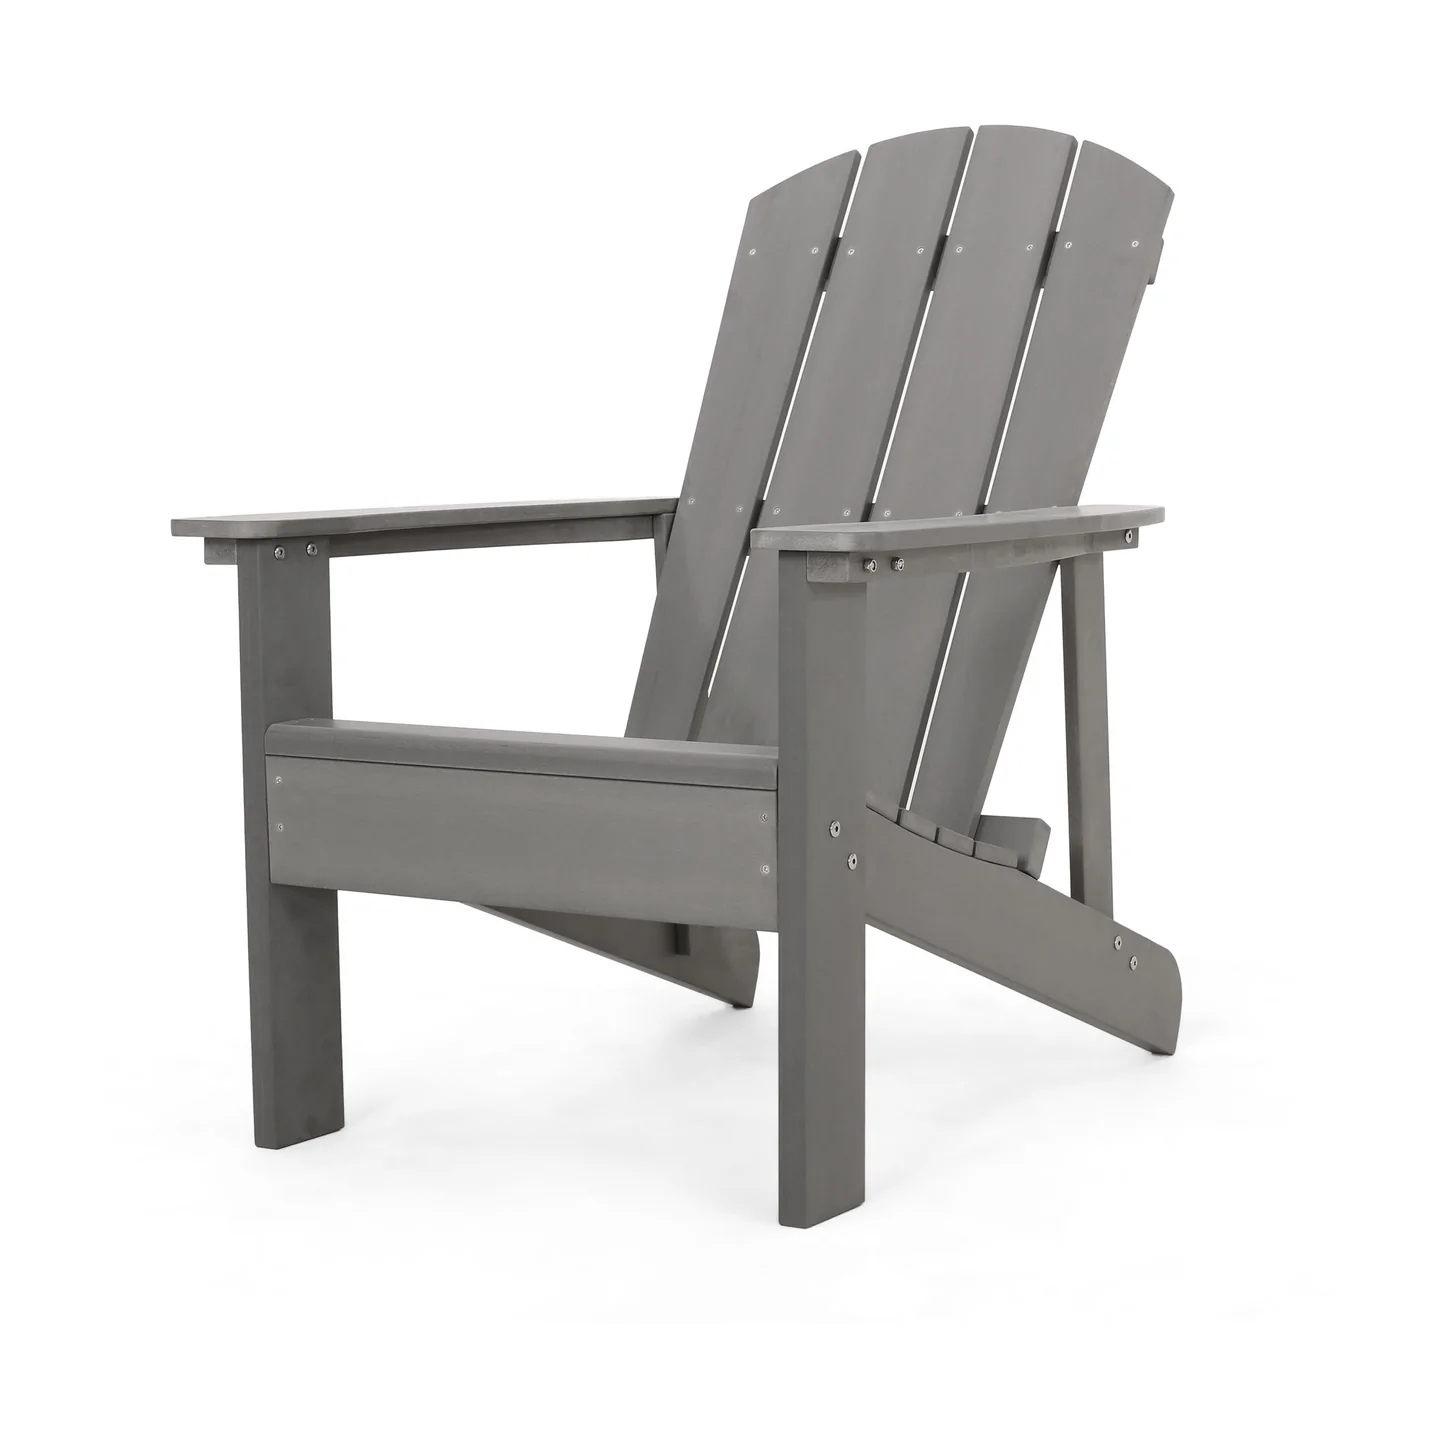 LANTRO JS Classic Solid Gray Outdoor Solid Wood Adirondack Chair Garden Lounge Chair - image 3 of 8